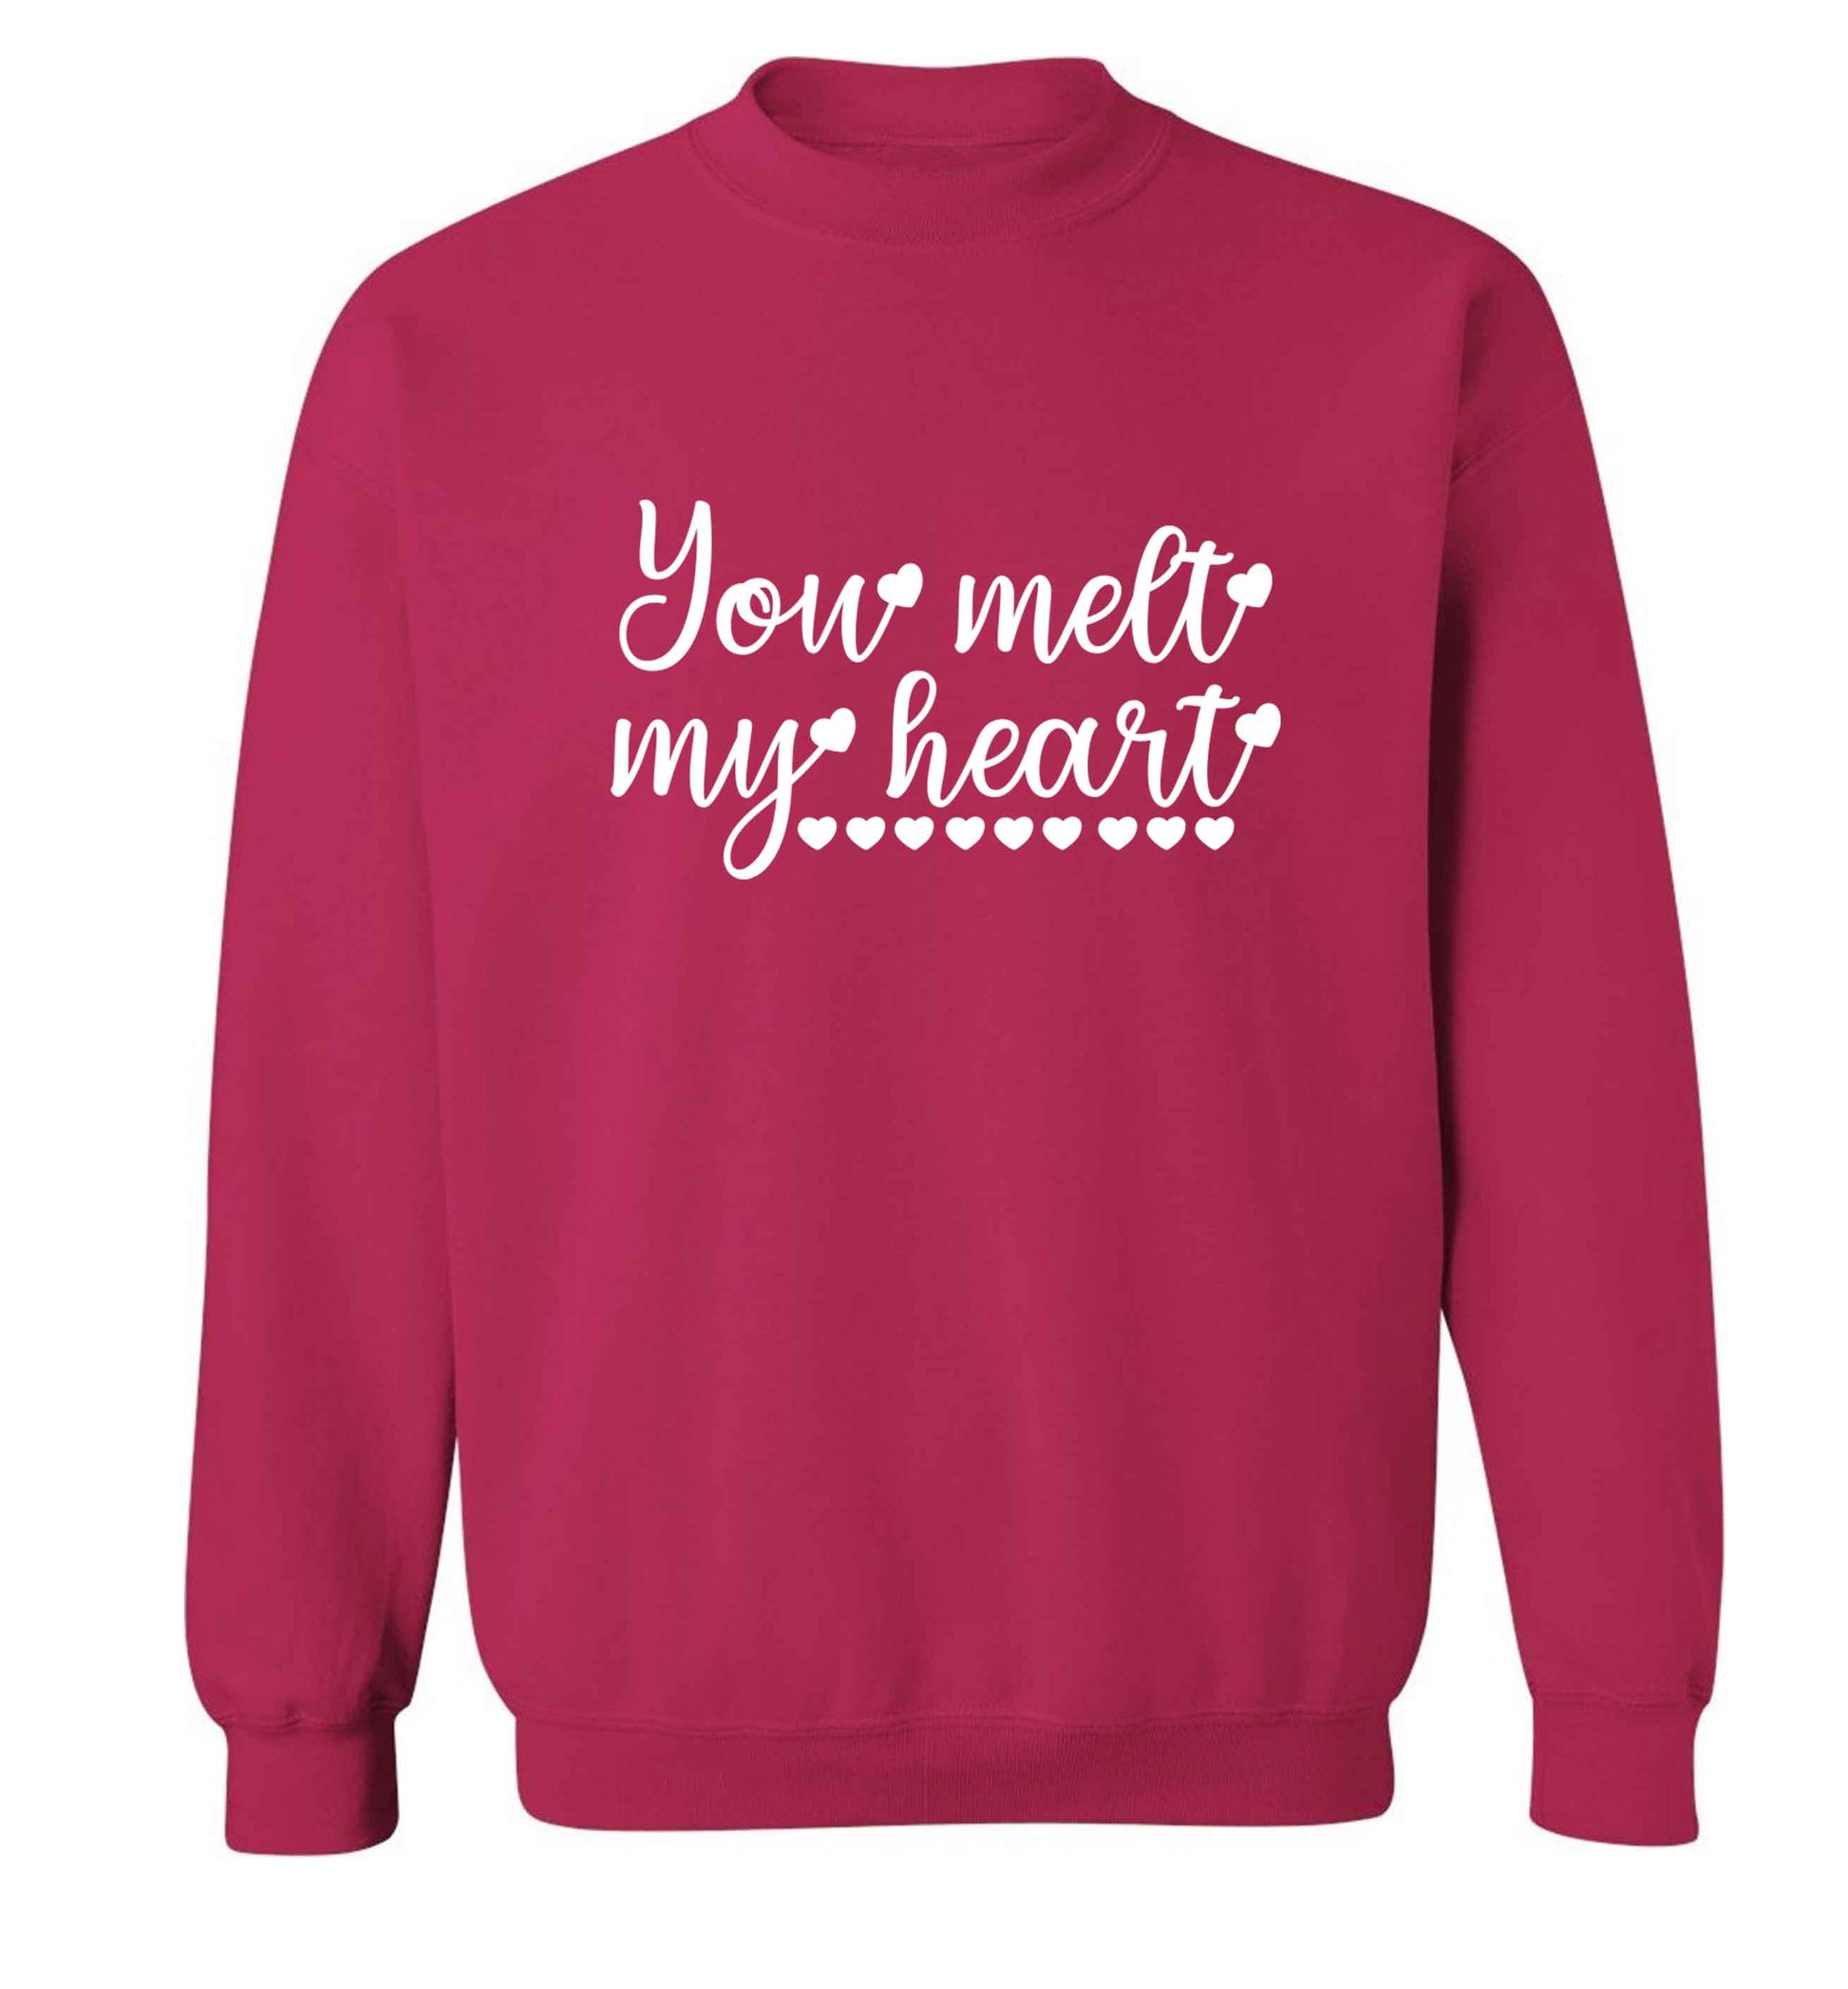 You melt my heart adult's unisex pink sweater 2XL